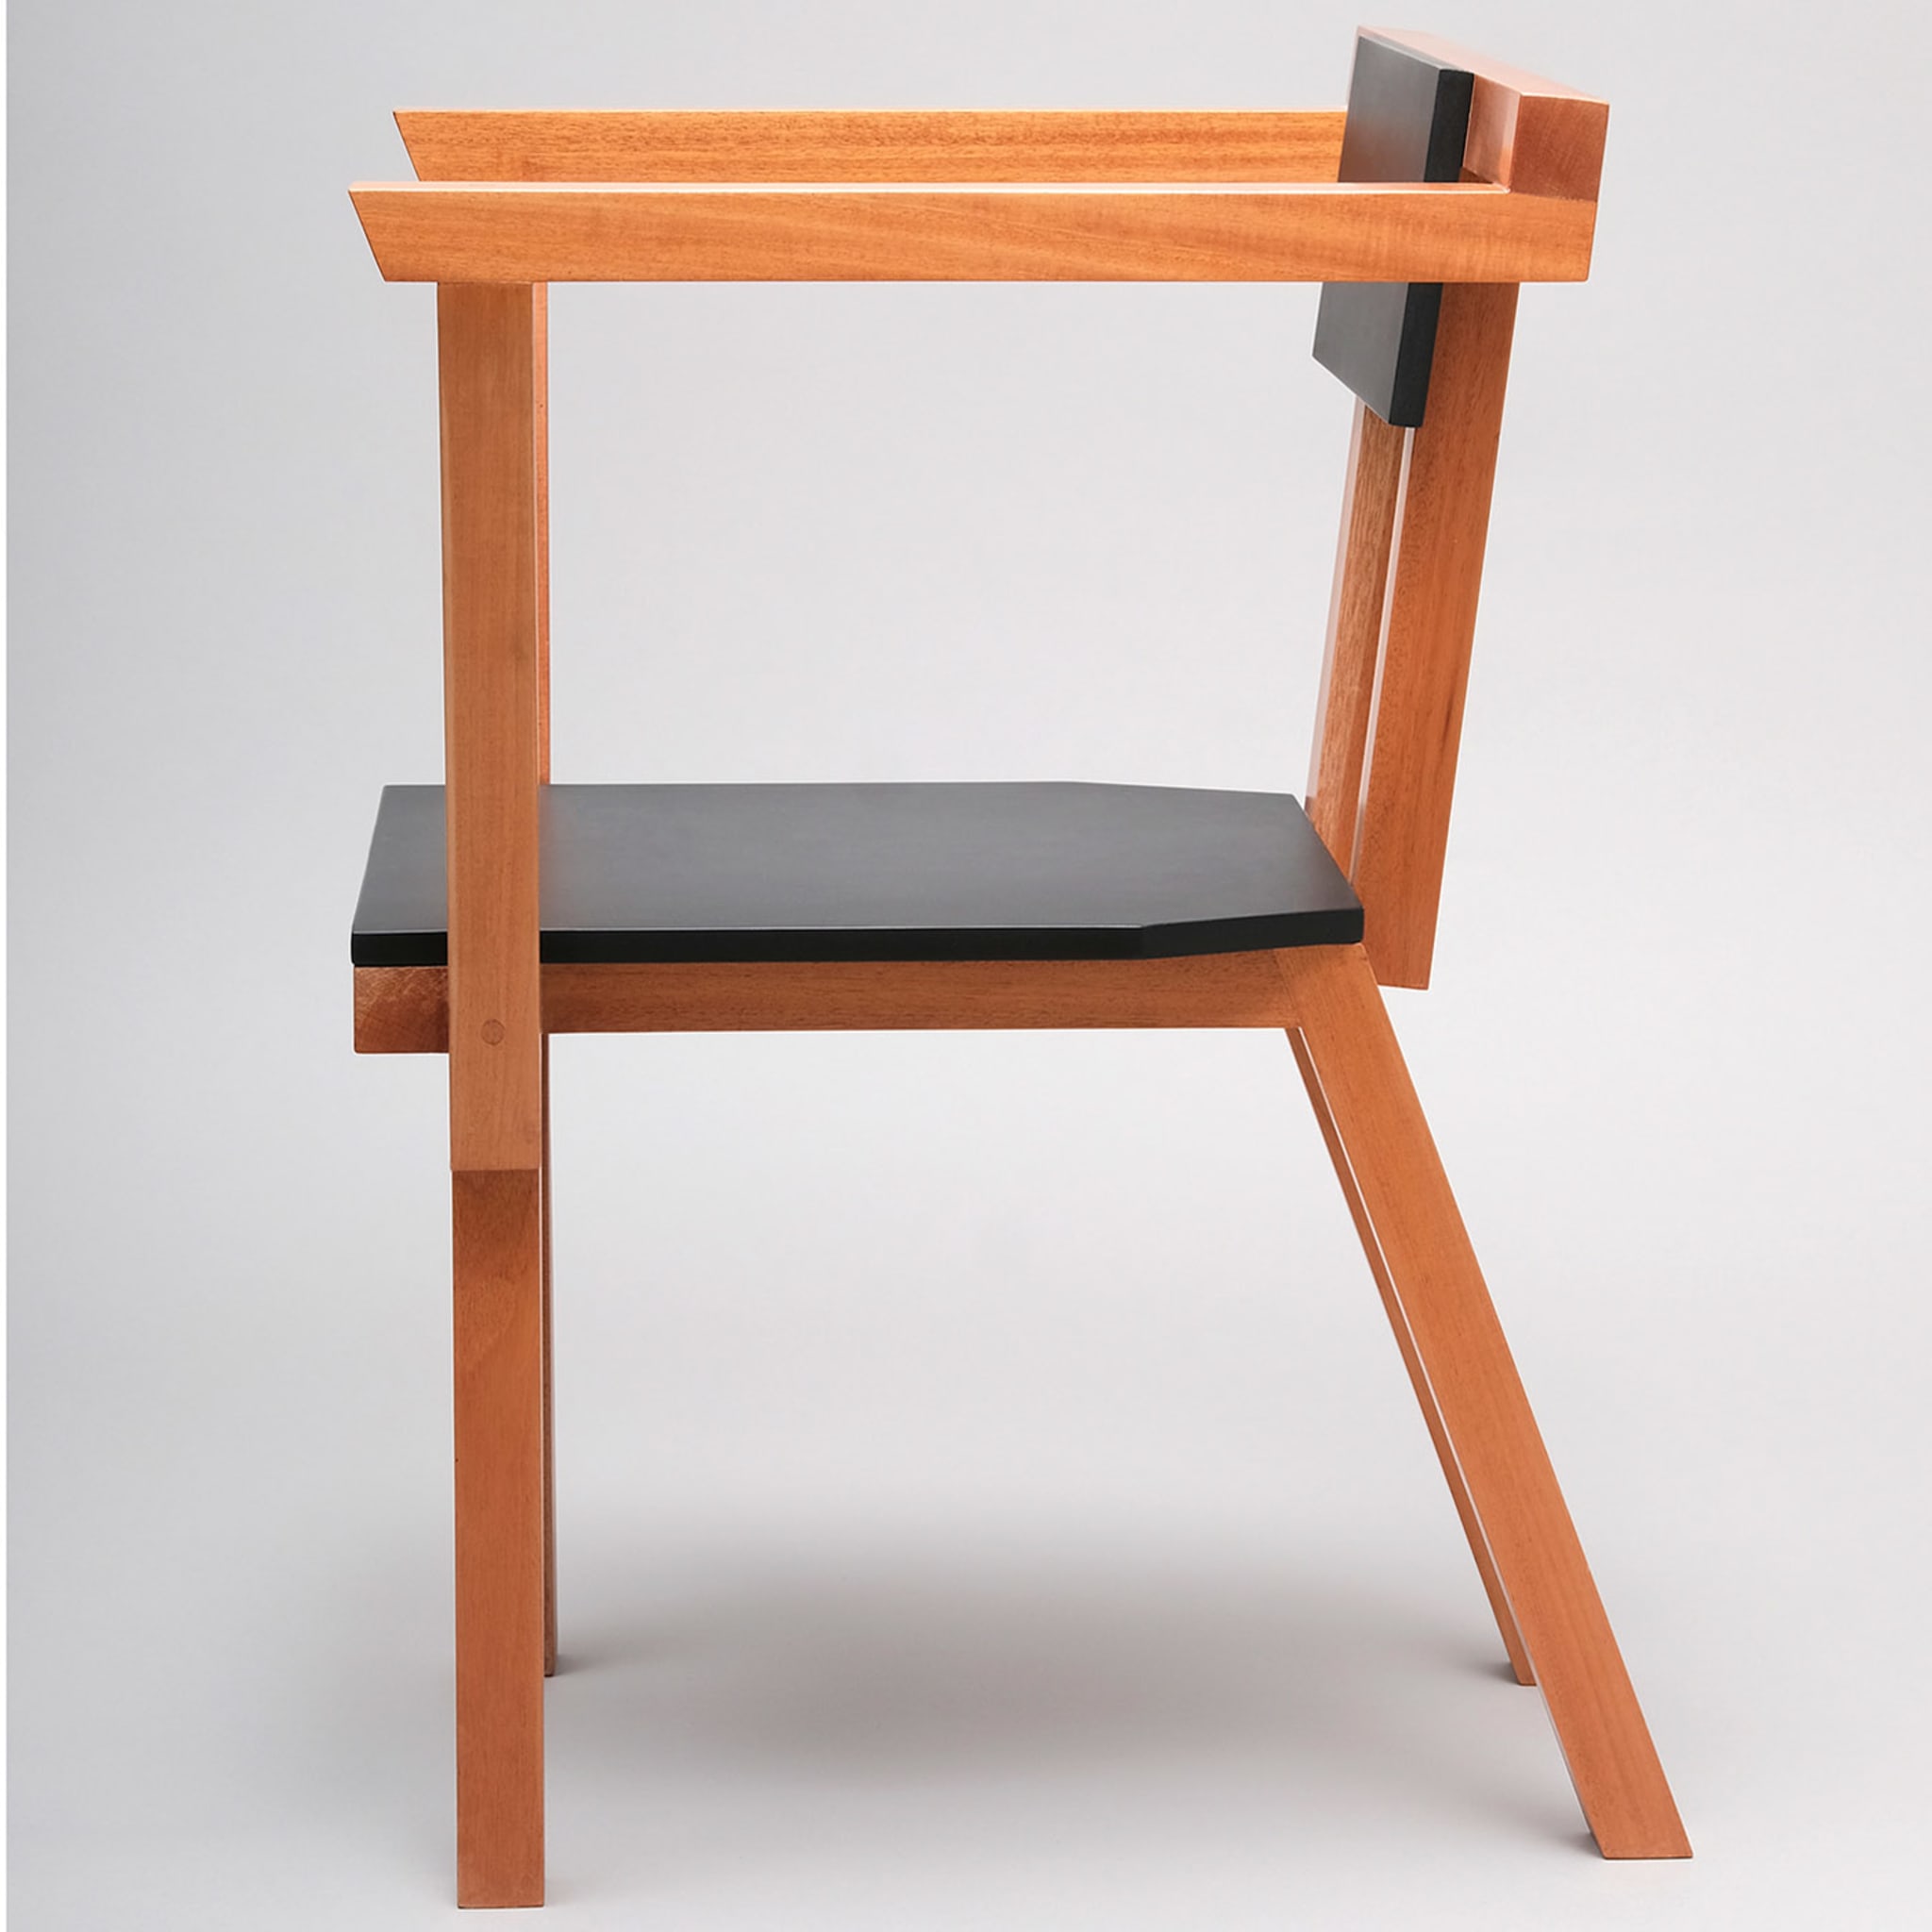 Kaspa Negra Chair With Arms By Clemence Seilles - Alternative view 3